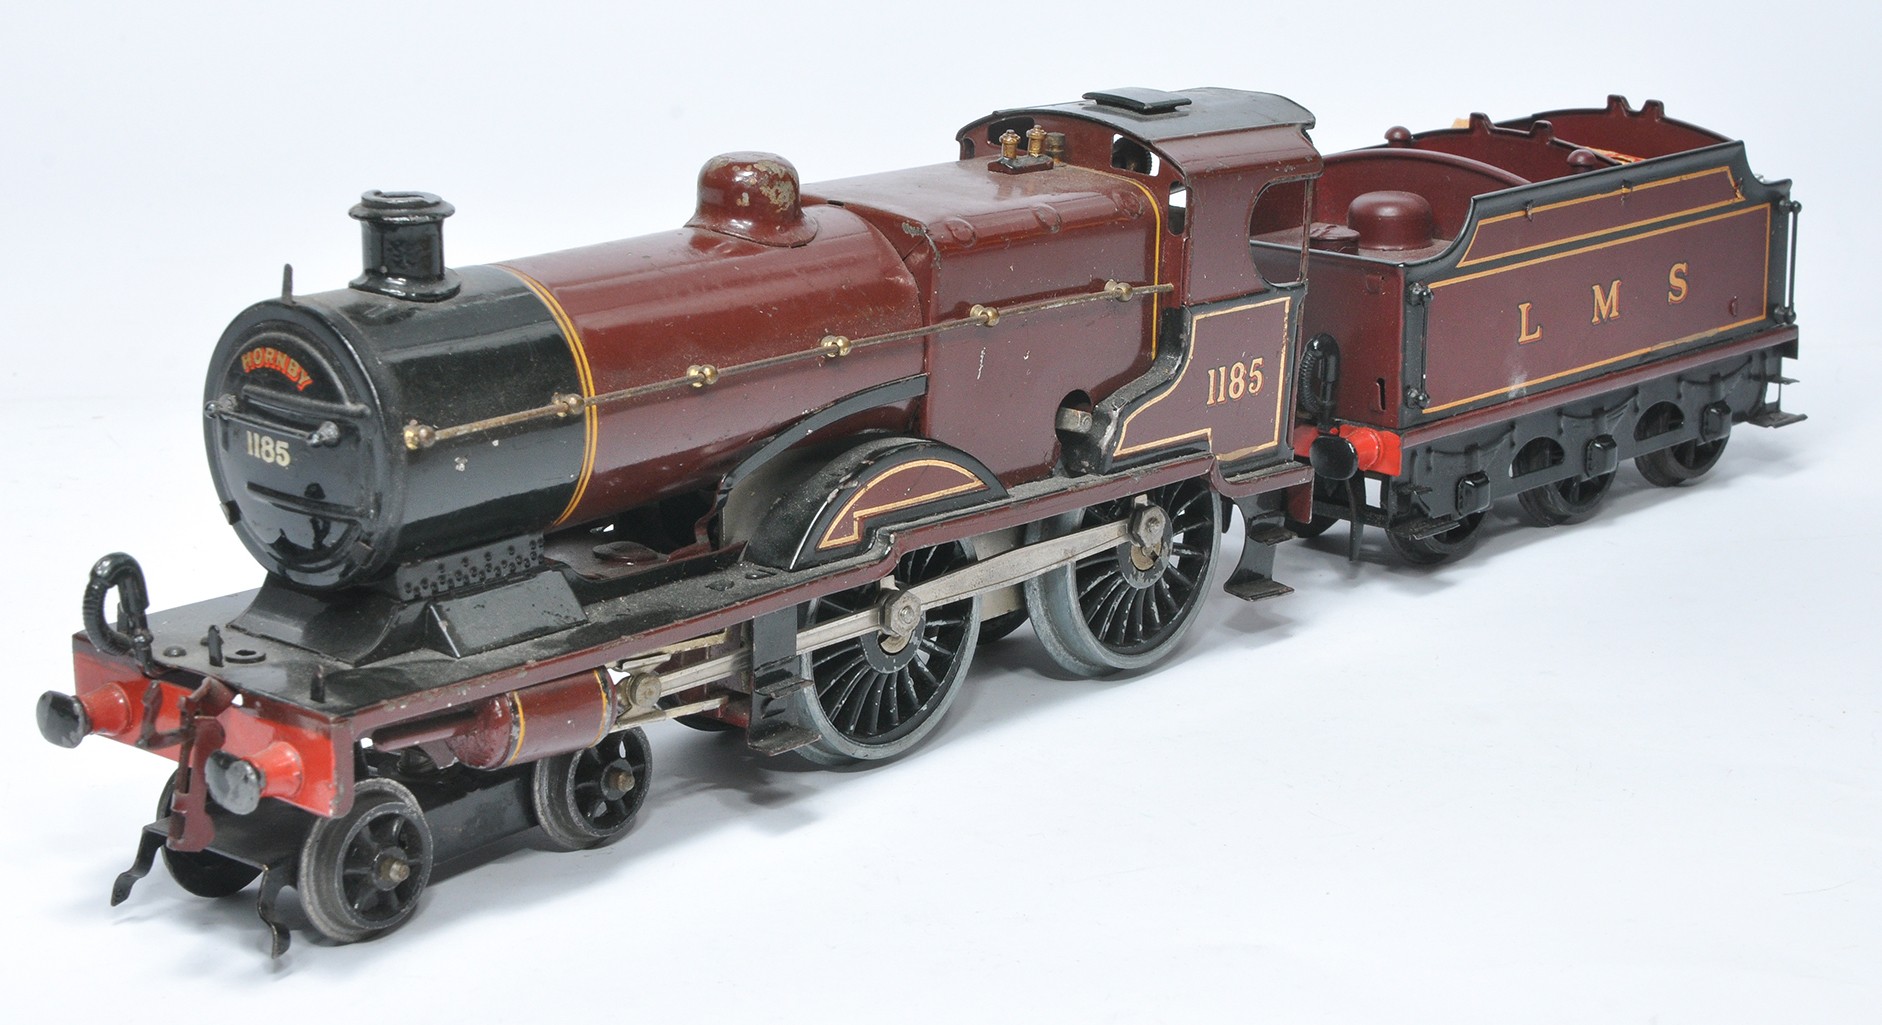 Hornby O Gauge Model Railway issue comprising E220 Special Locomotive LMS 1185 with tender (